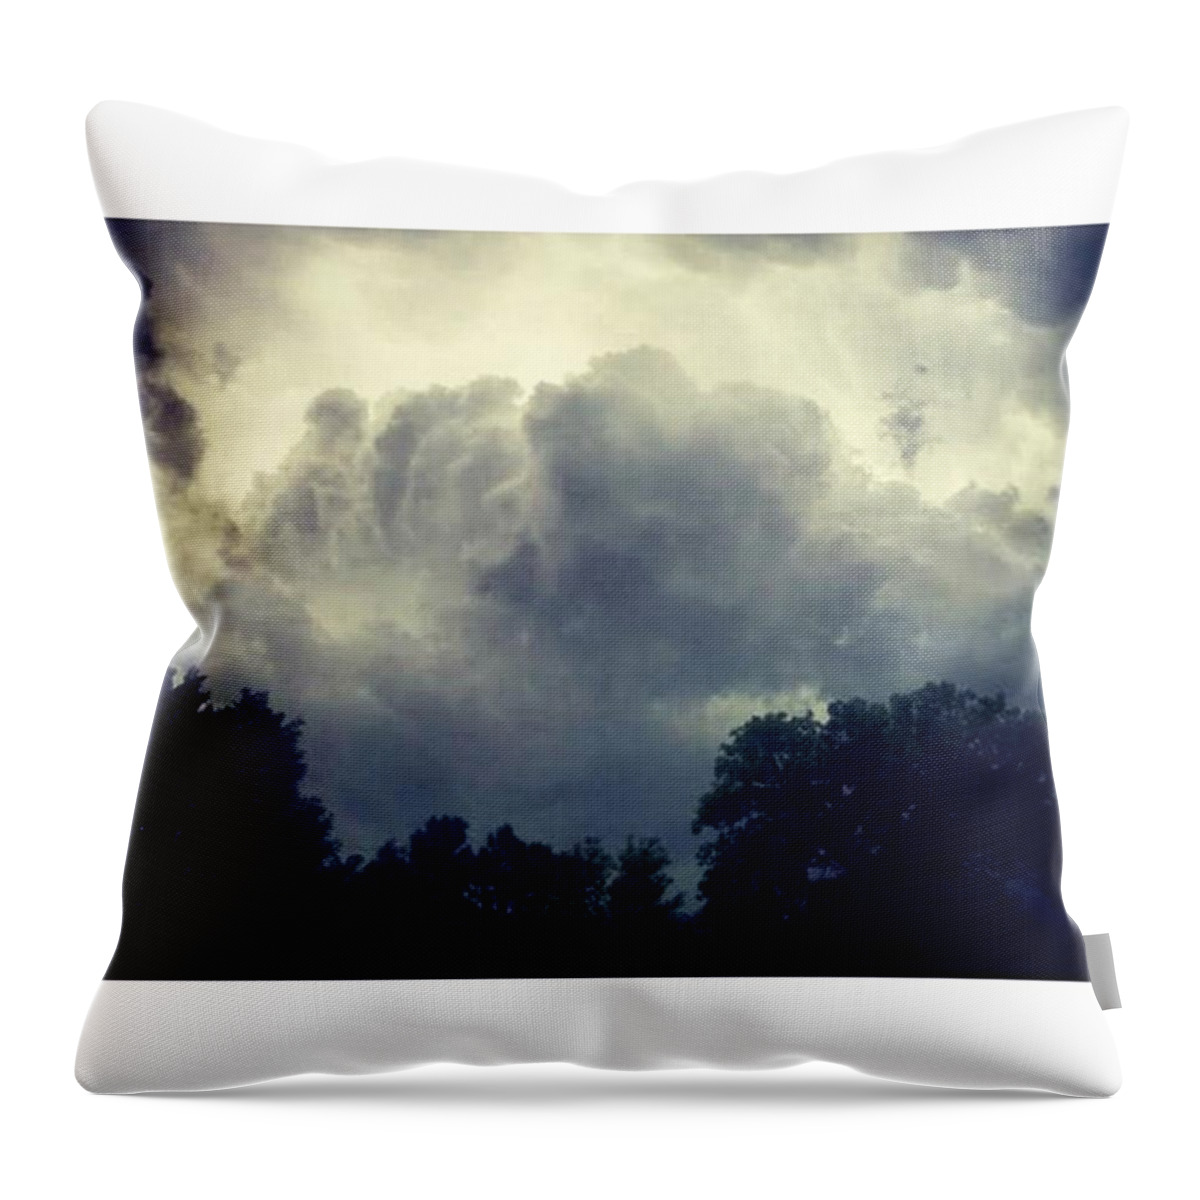 Summer Throw Pillow featuring the photograph The Thunder Rolls by Mnwx Watcher